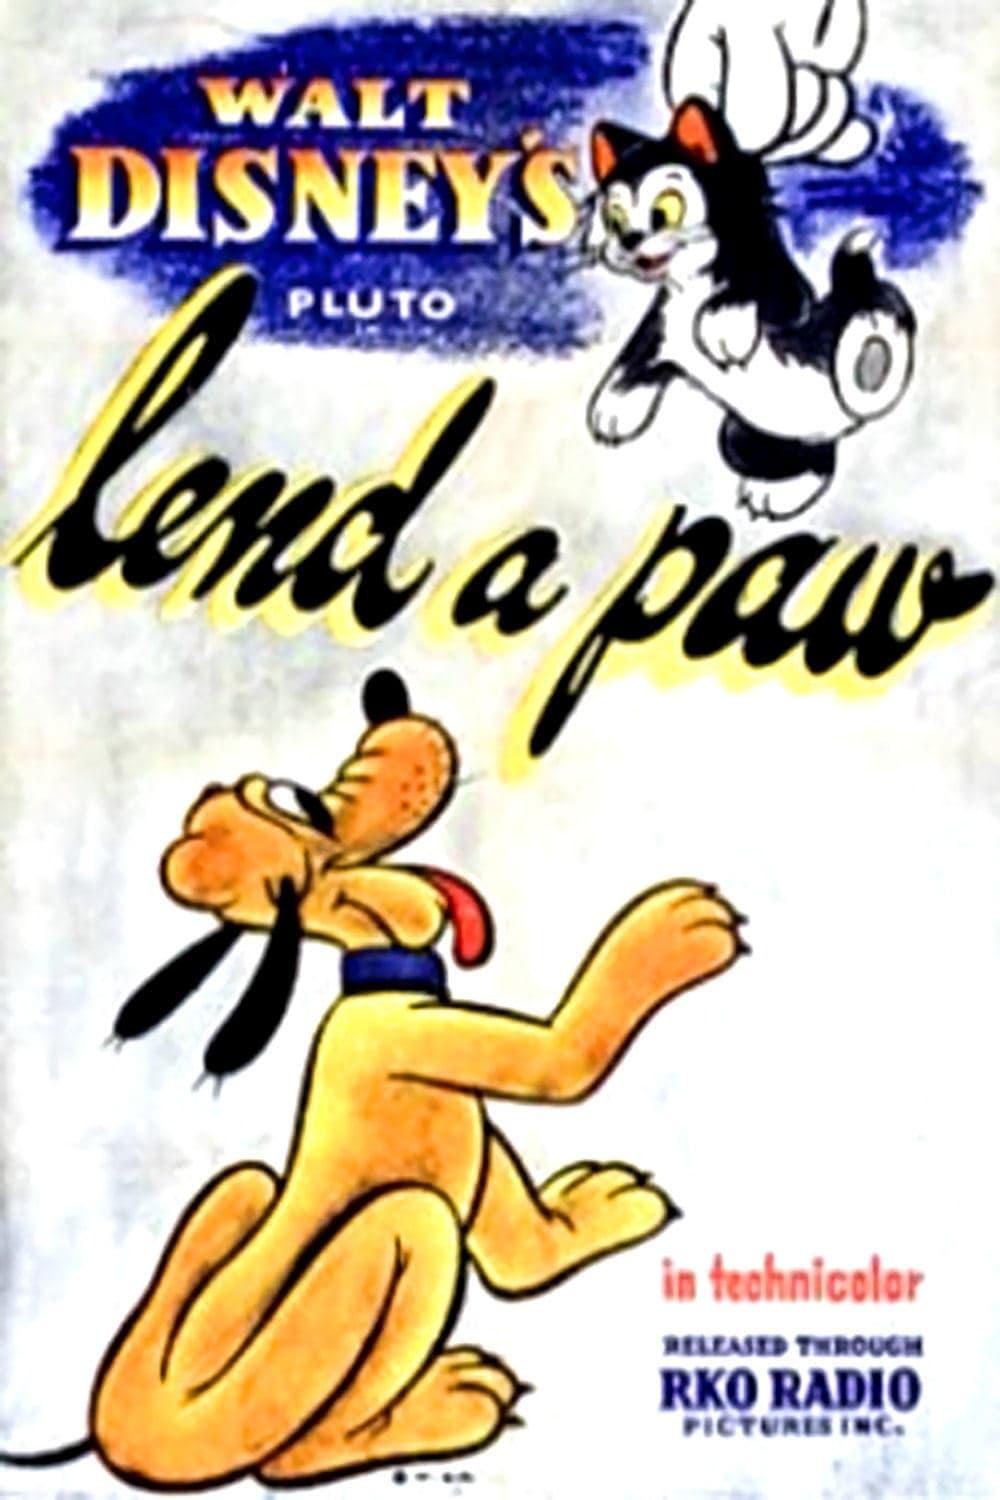 Lend a Paw poster